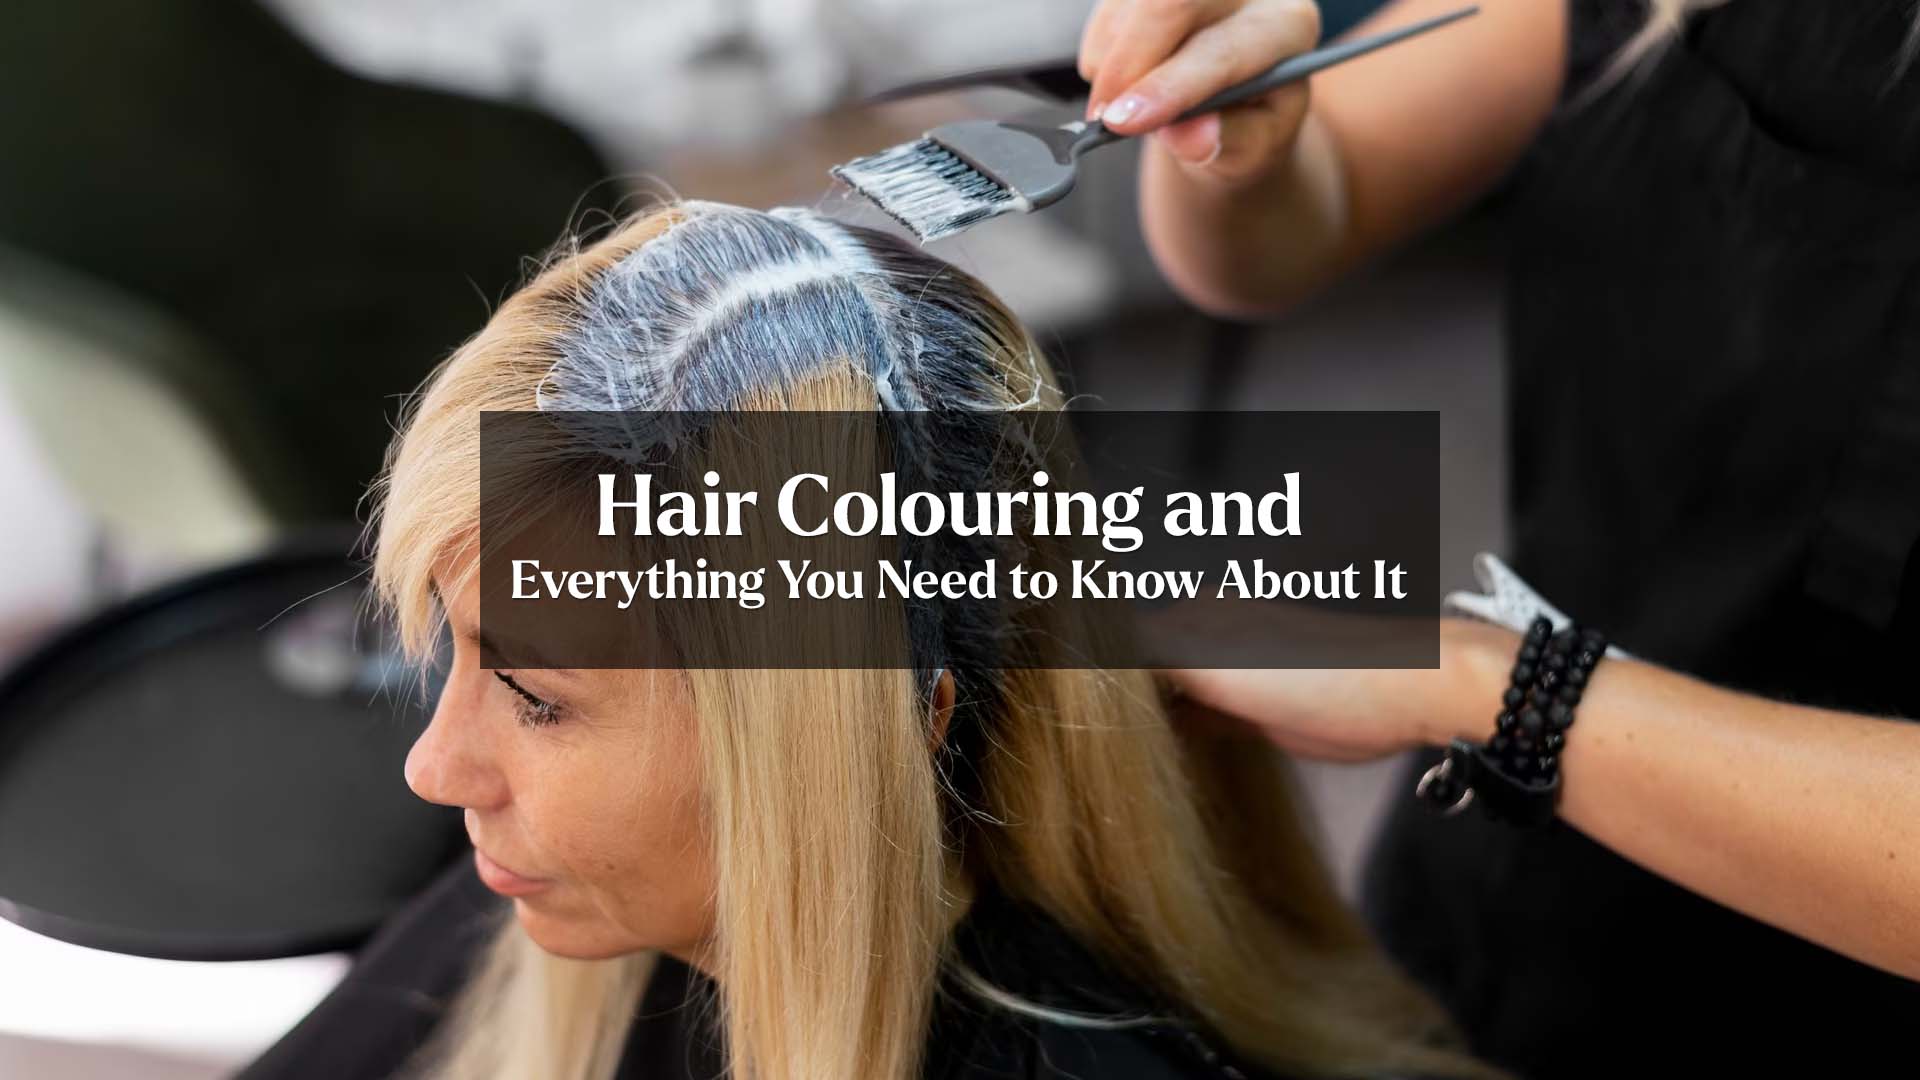 Hair Colouring and Everything You Need to Know About It